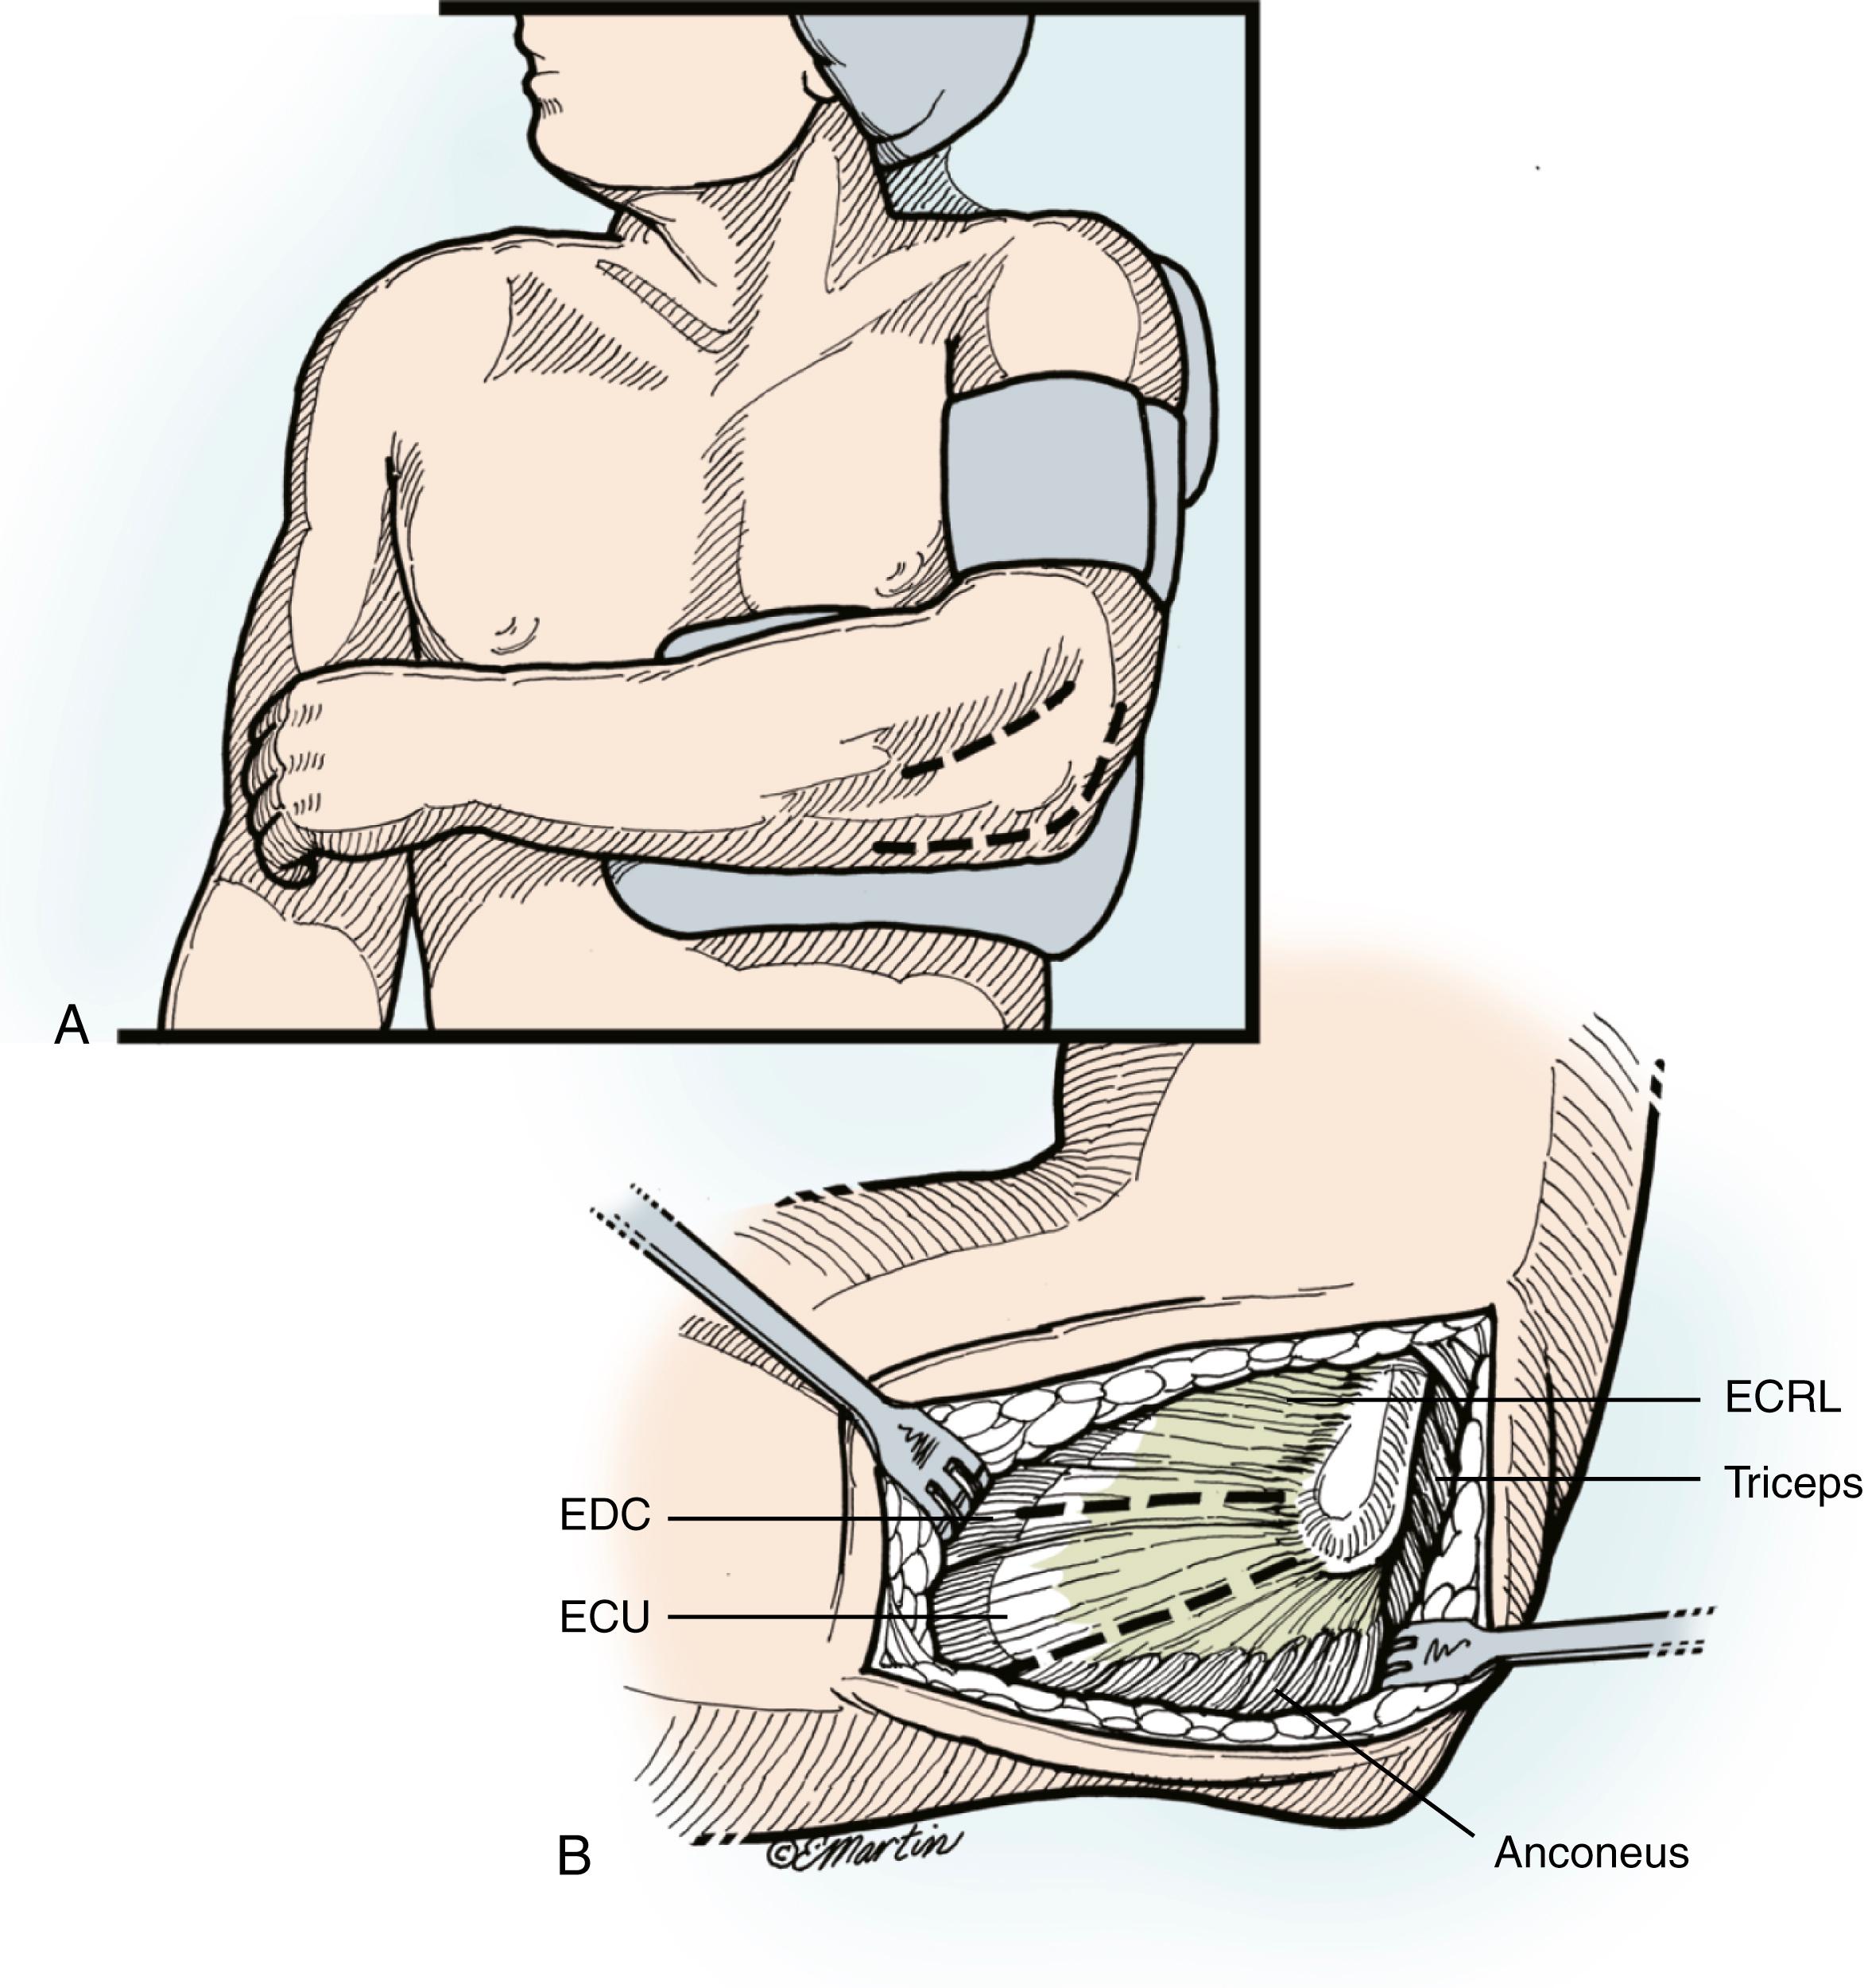 Fig. 19.13, Superficial surgical approaches. A, Posterior midline skin incision is employed just lateral to the tip of the olecranon. B, A full-thickness lateral flap is elevated. The use of this incision allows access to the medial aspect of the elbow (if necessary) to manage associated injuries to the medial collateral ligament or coronoid, is less obvious due to its location, and has a low incidence of cutaneous nerve injury. Alternatively, a lateral incision can be employed at the surgeon’s discretion. Exposure of the radial head can be obtained using either a Kocher approach between the anconeus and extensor carpi ulnaris or a more anterior common extensor tendon split. ECRL, Extensor carpi radialis longus; ECU, extensor carpi ulnaris; EDC, extensor digitorum communis.